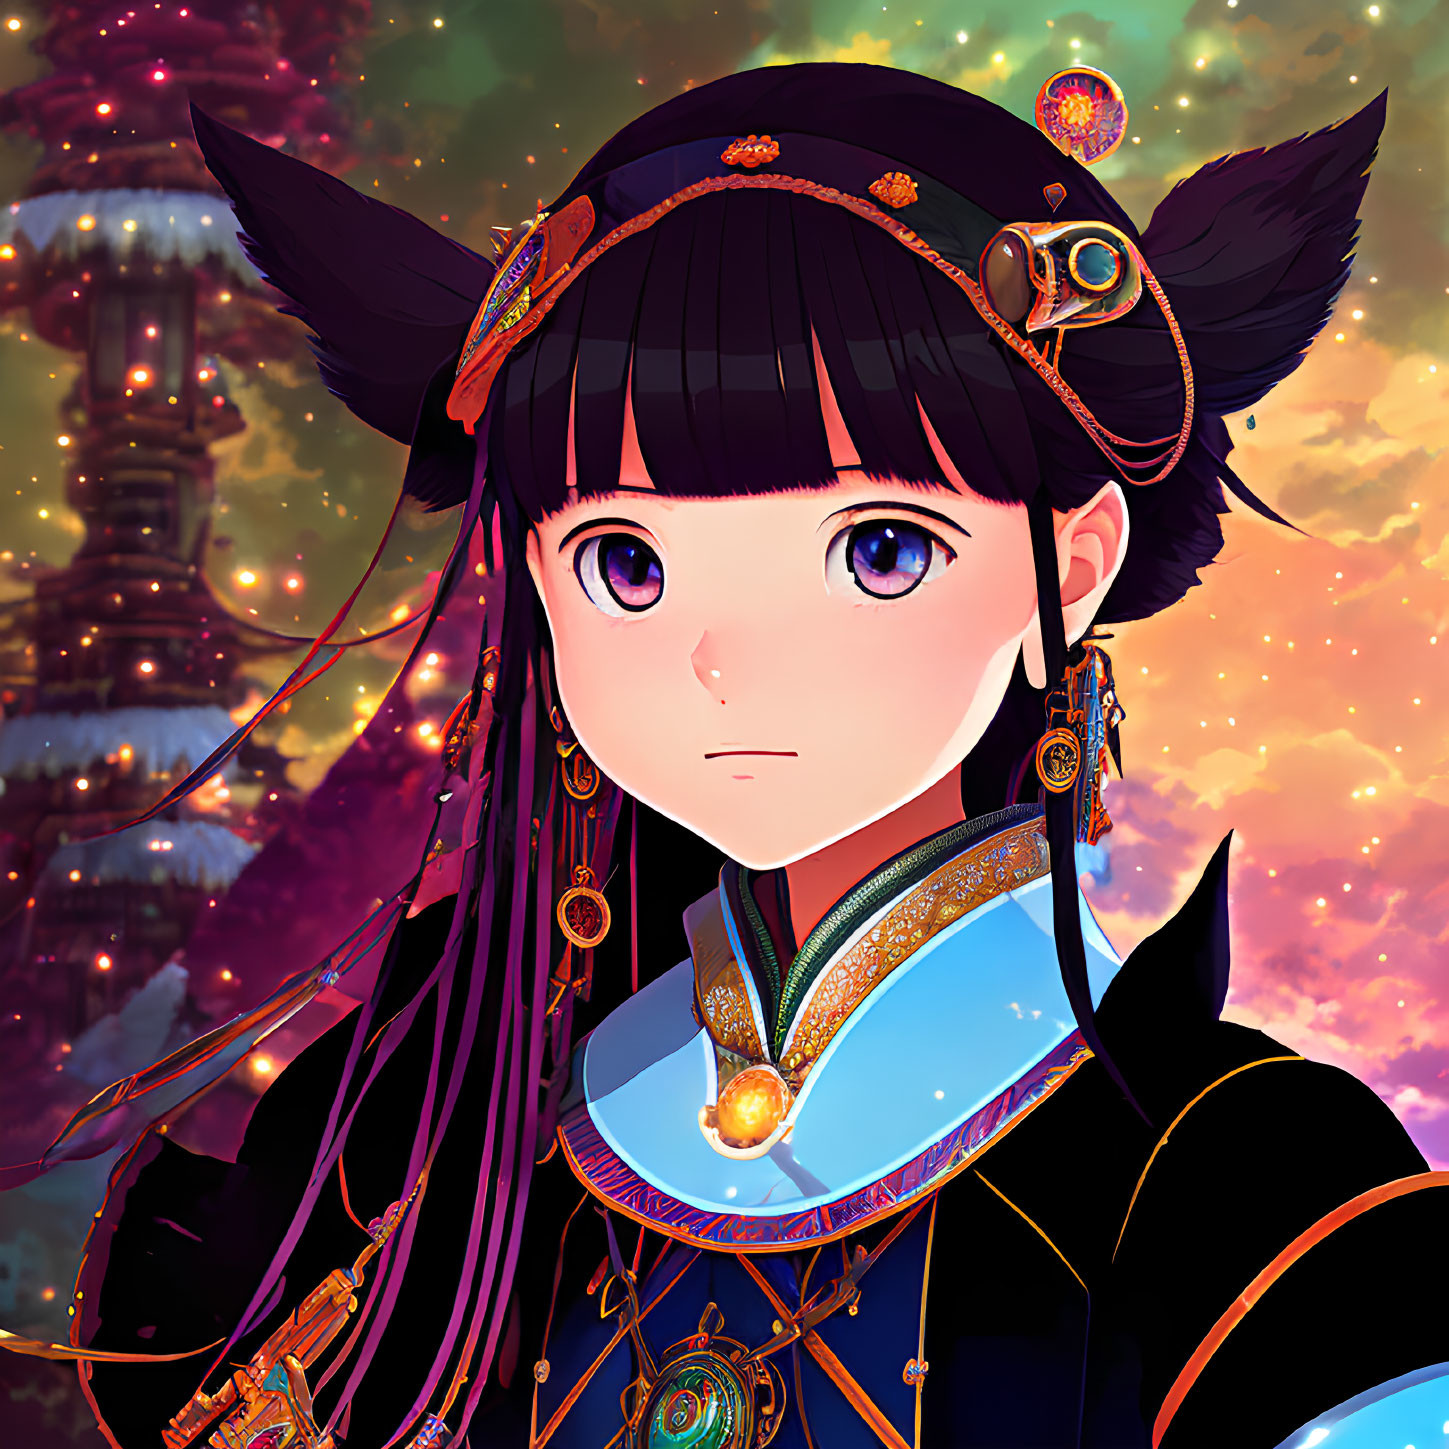 Girl with Large Eyes and Dark Hair in Gold Ornaments Against Cosmic Background